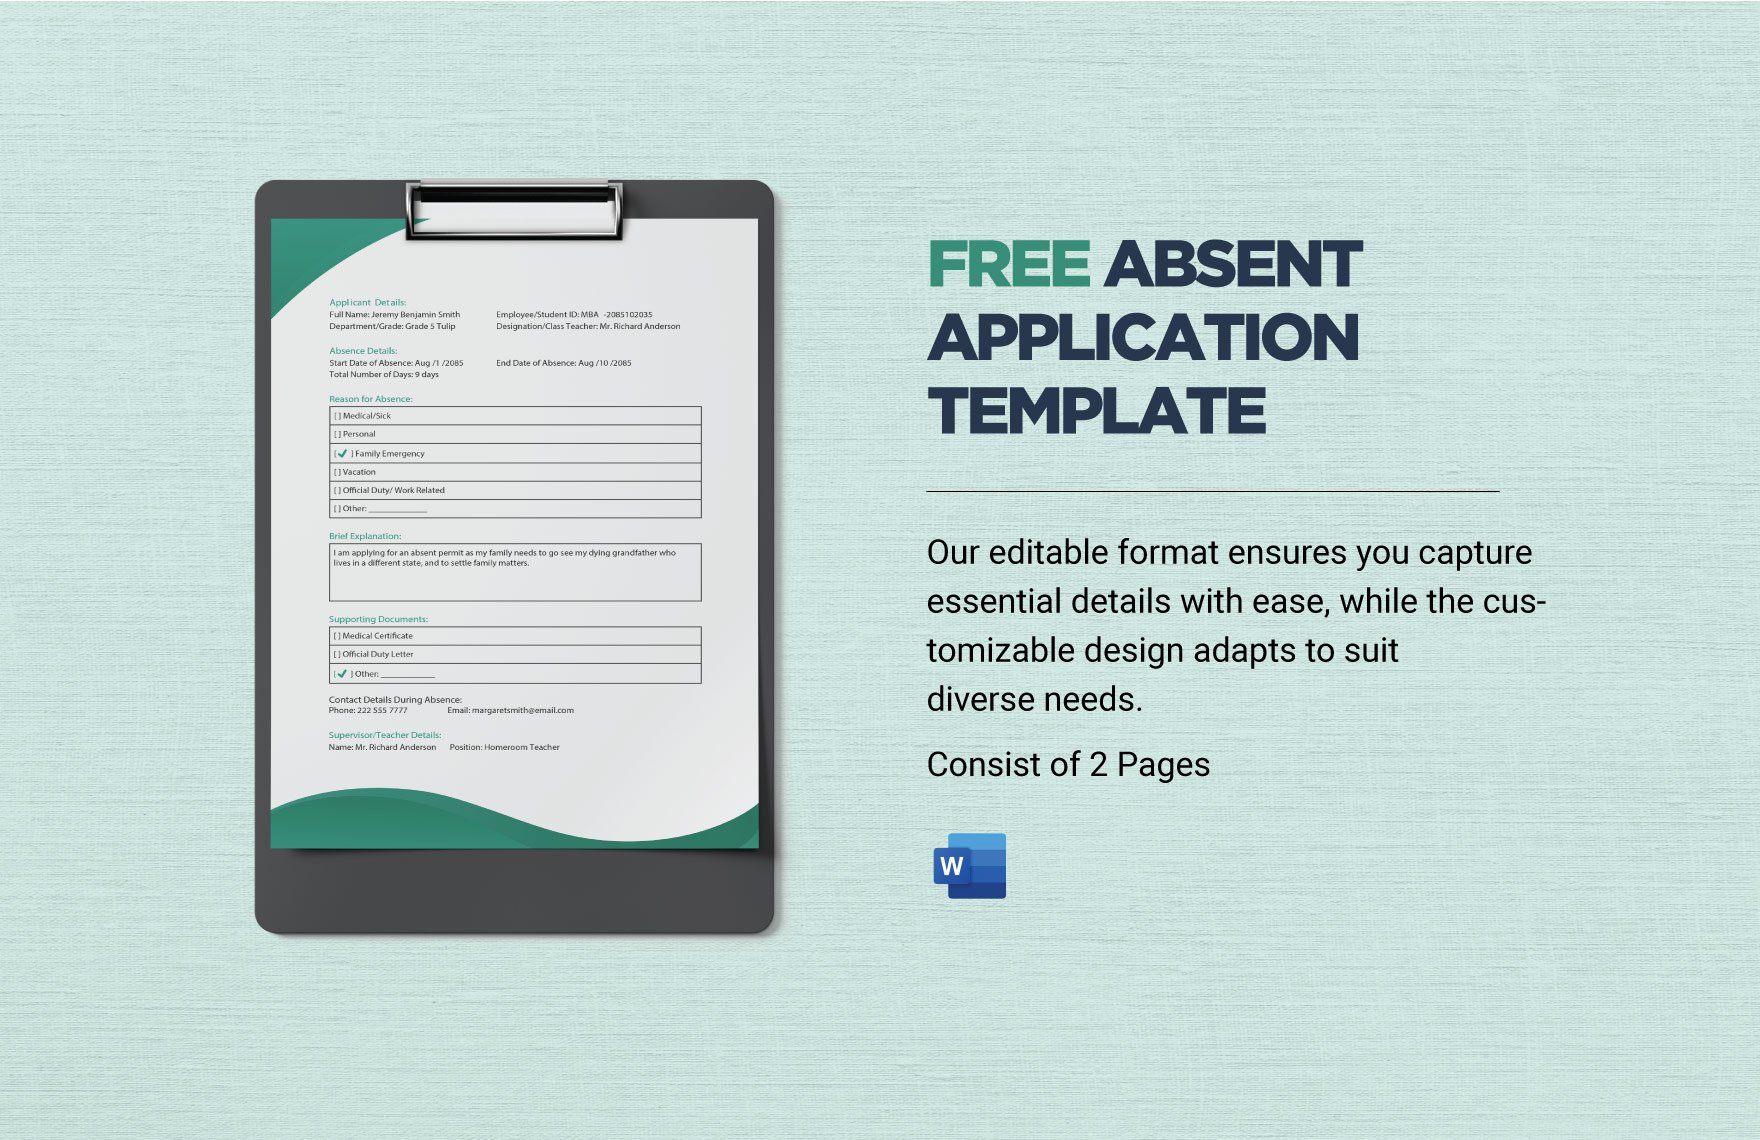 Free Absent Application Template in Word